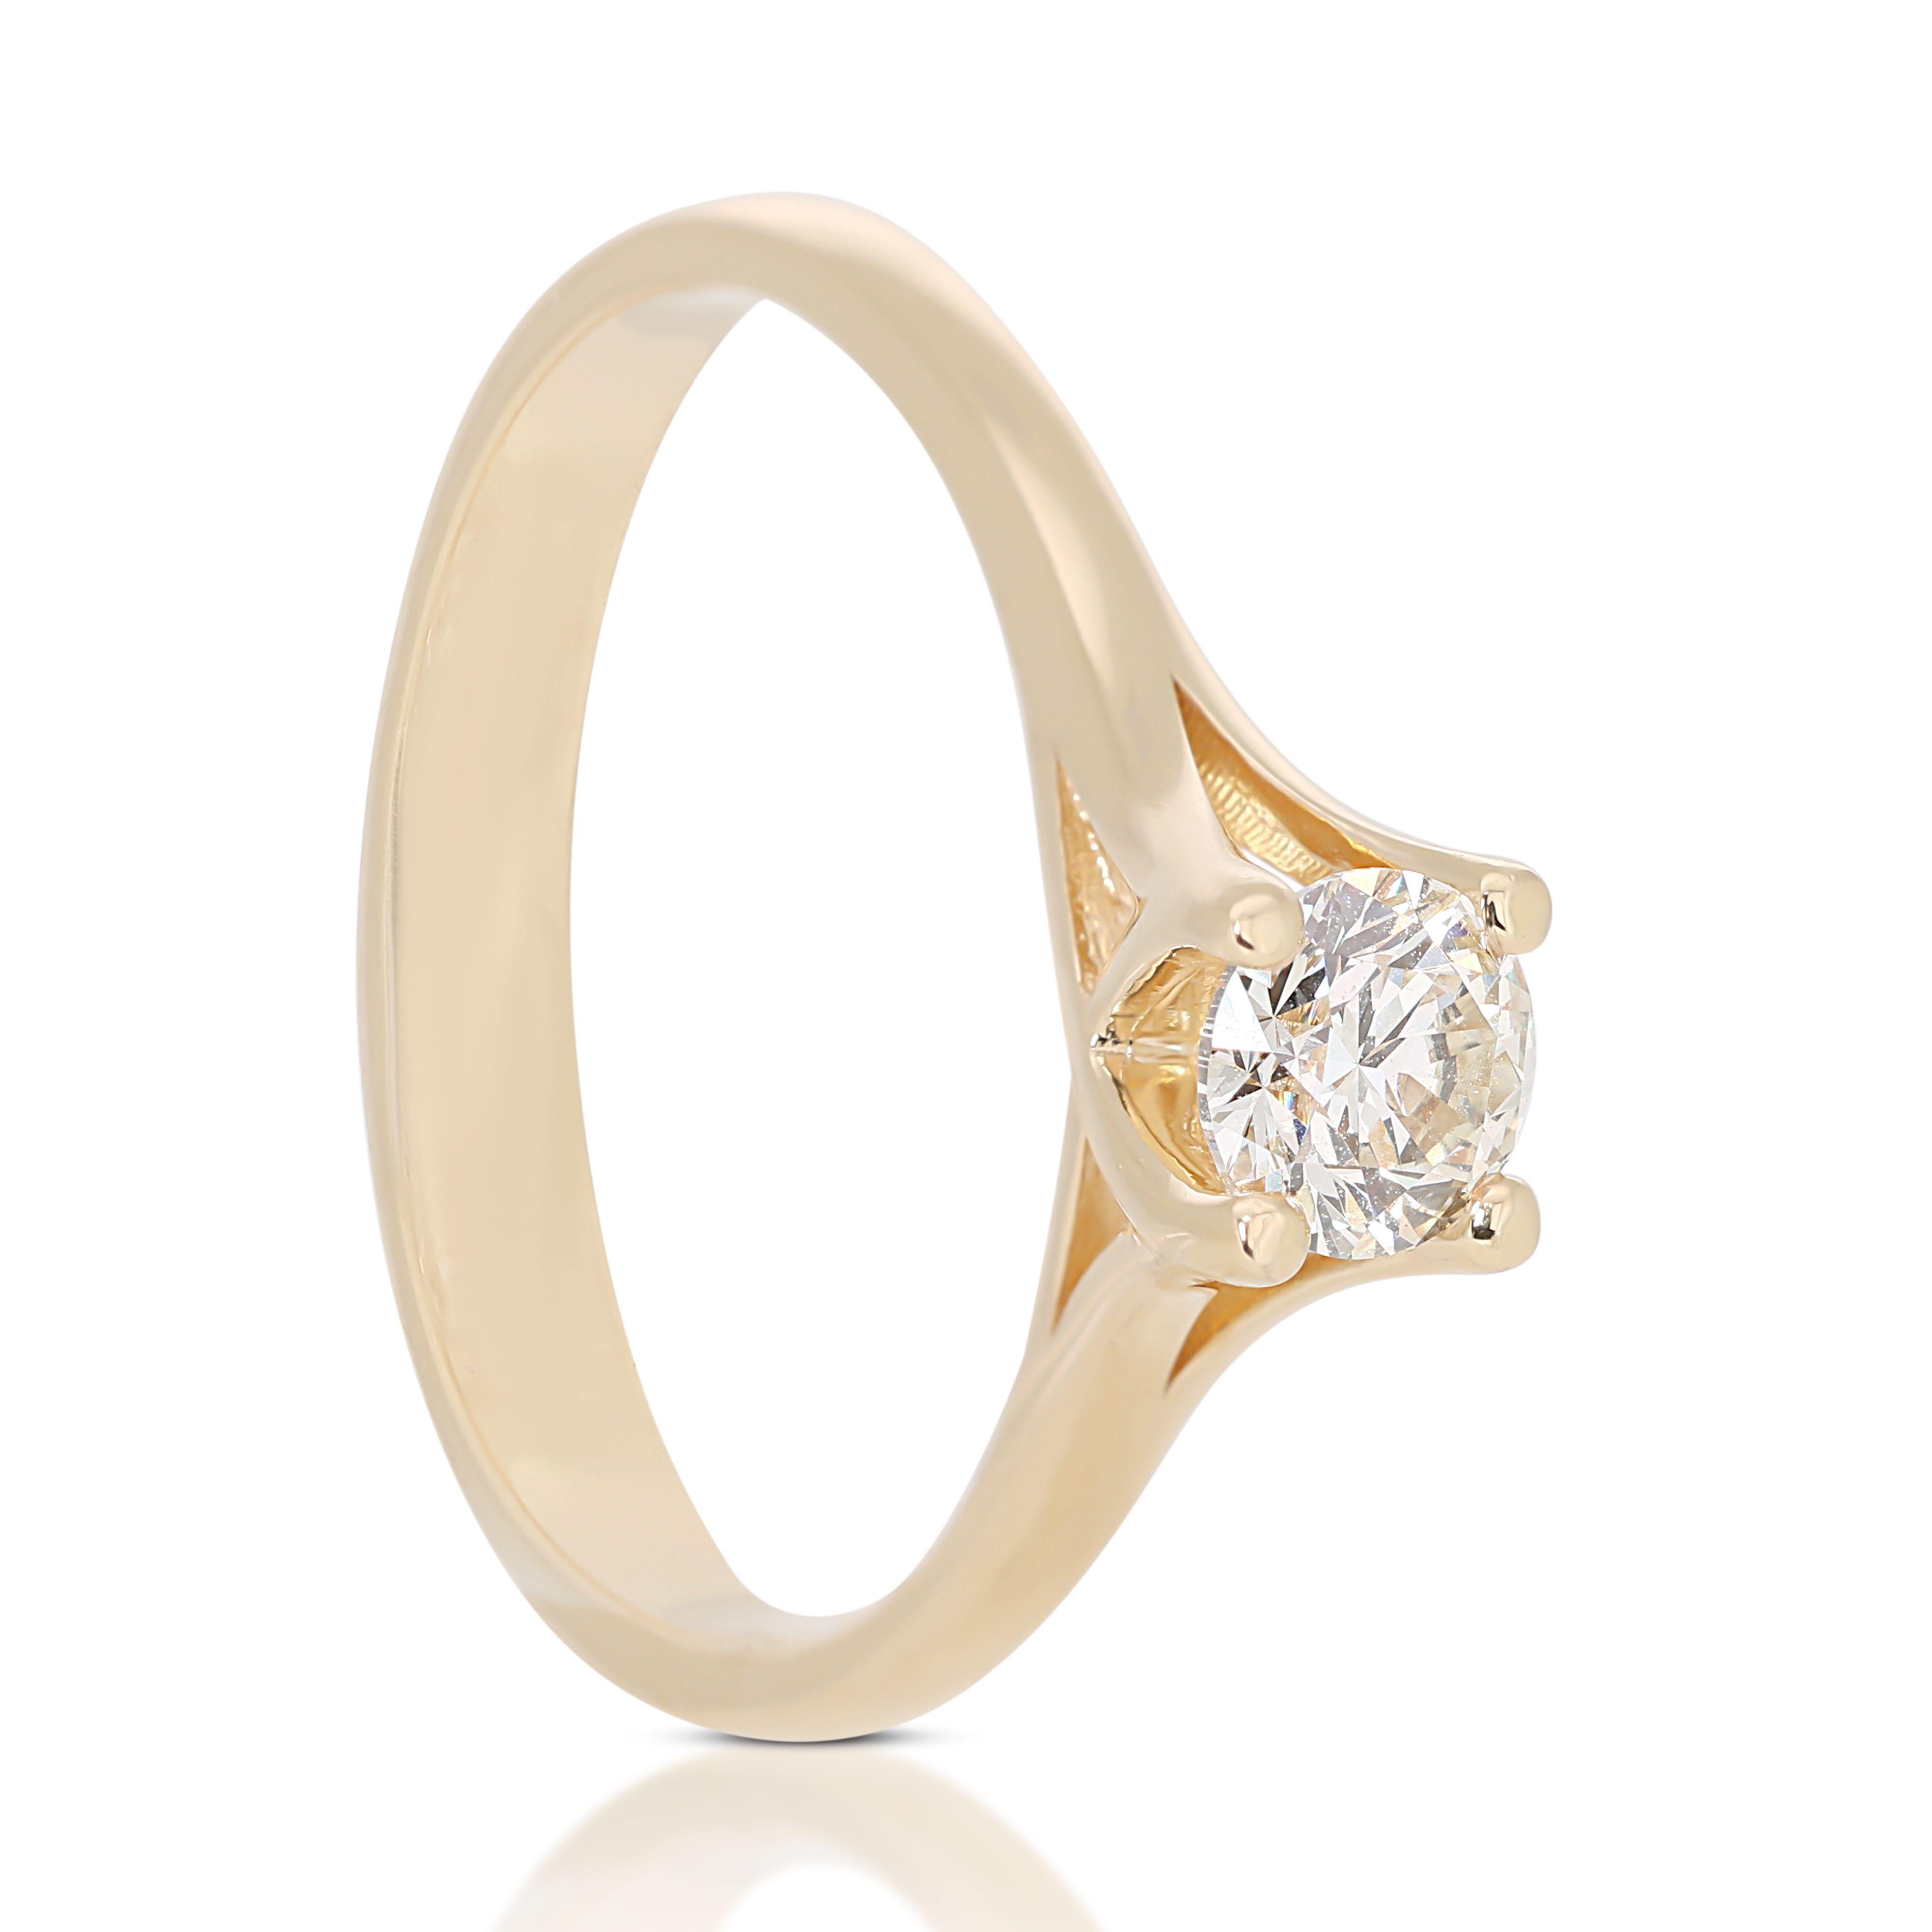 Enchanting Solitaire: 0.38 ct Diamond Shimmers in Warm 14K Gold For Sale 2